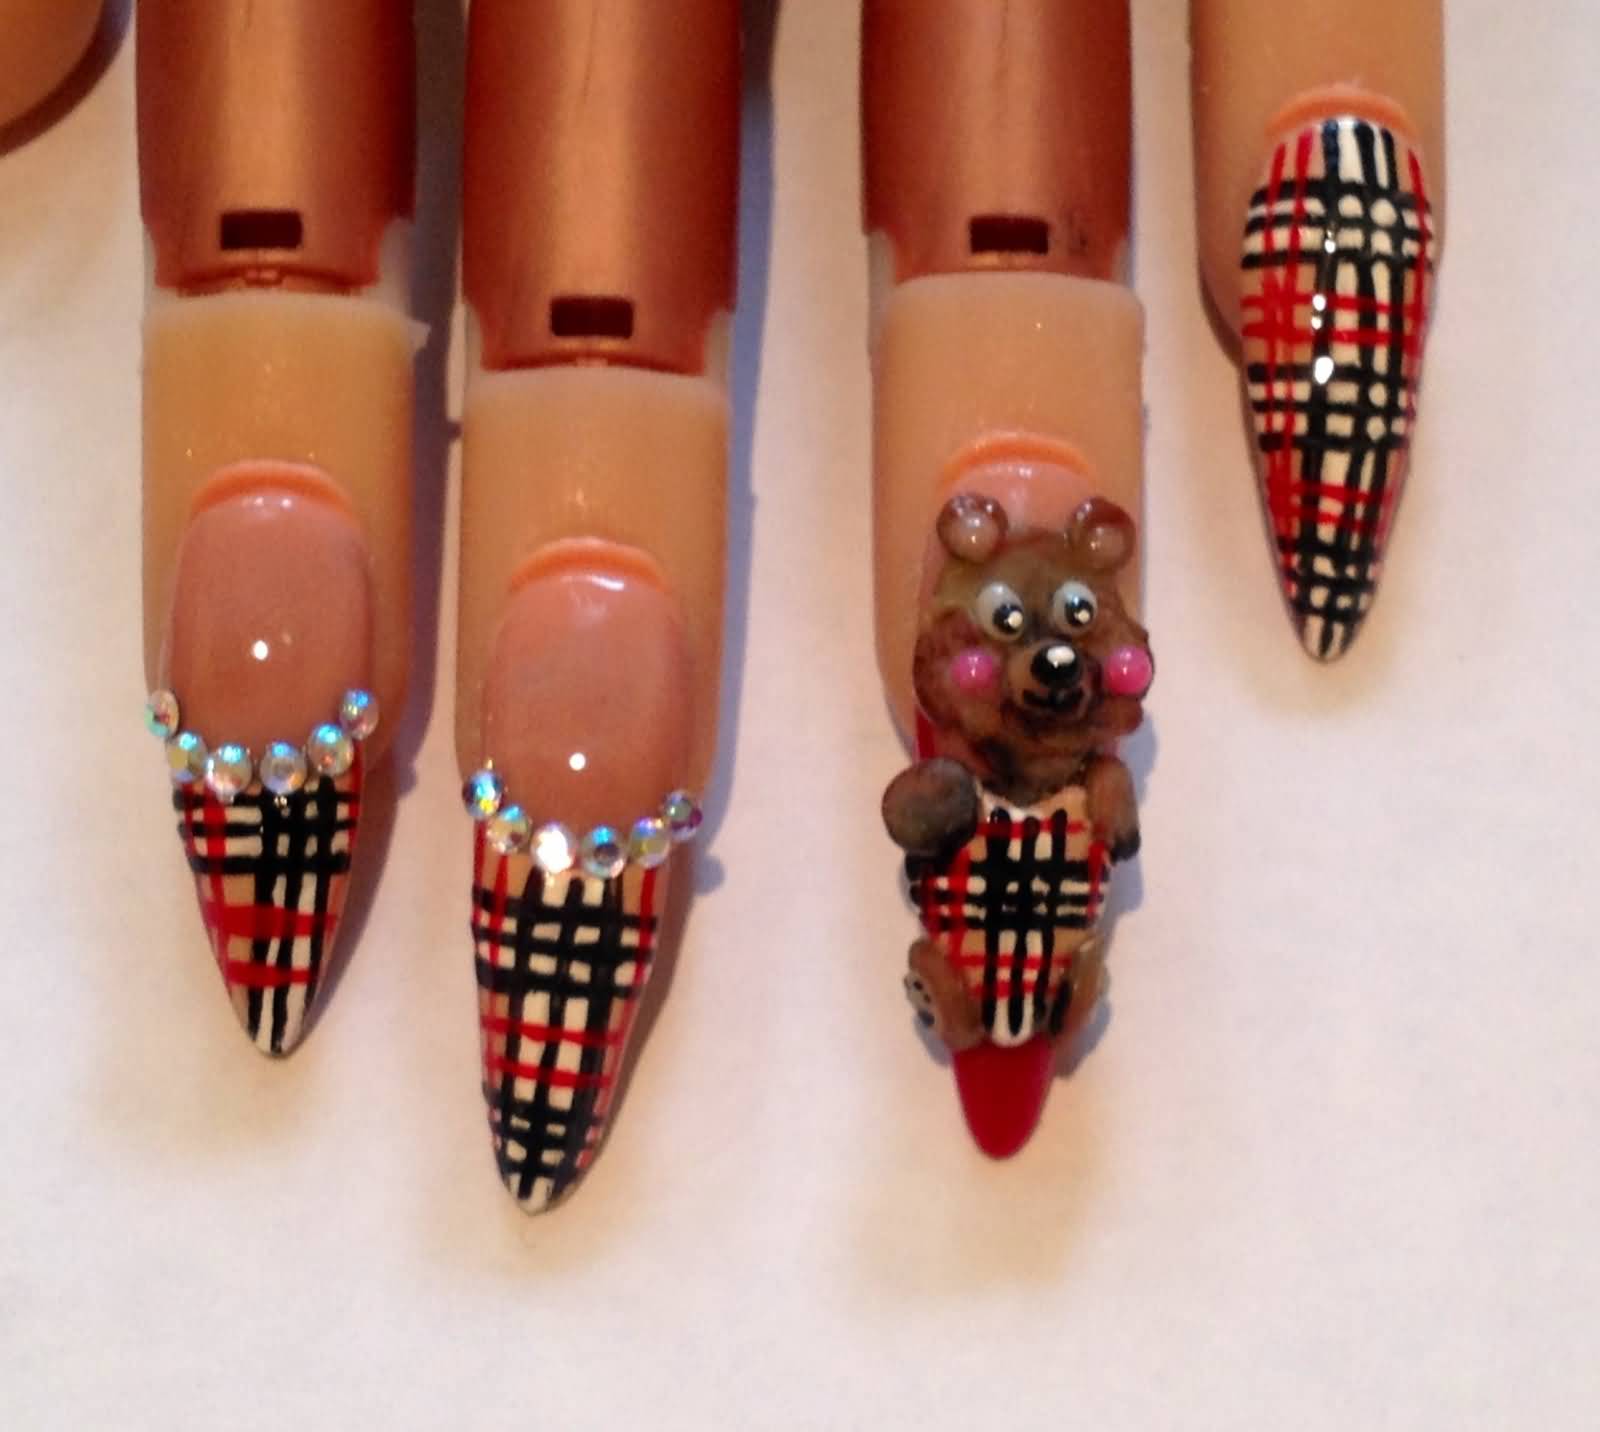 Stiletto Nails With Burberry Nail Art And 3d Teddy Bear Design